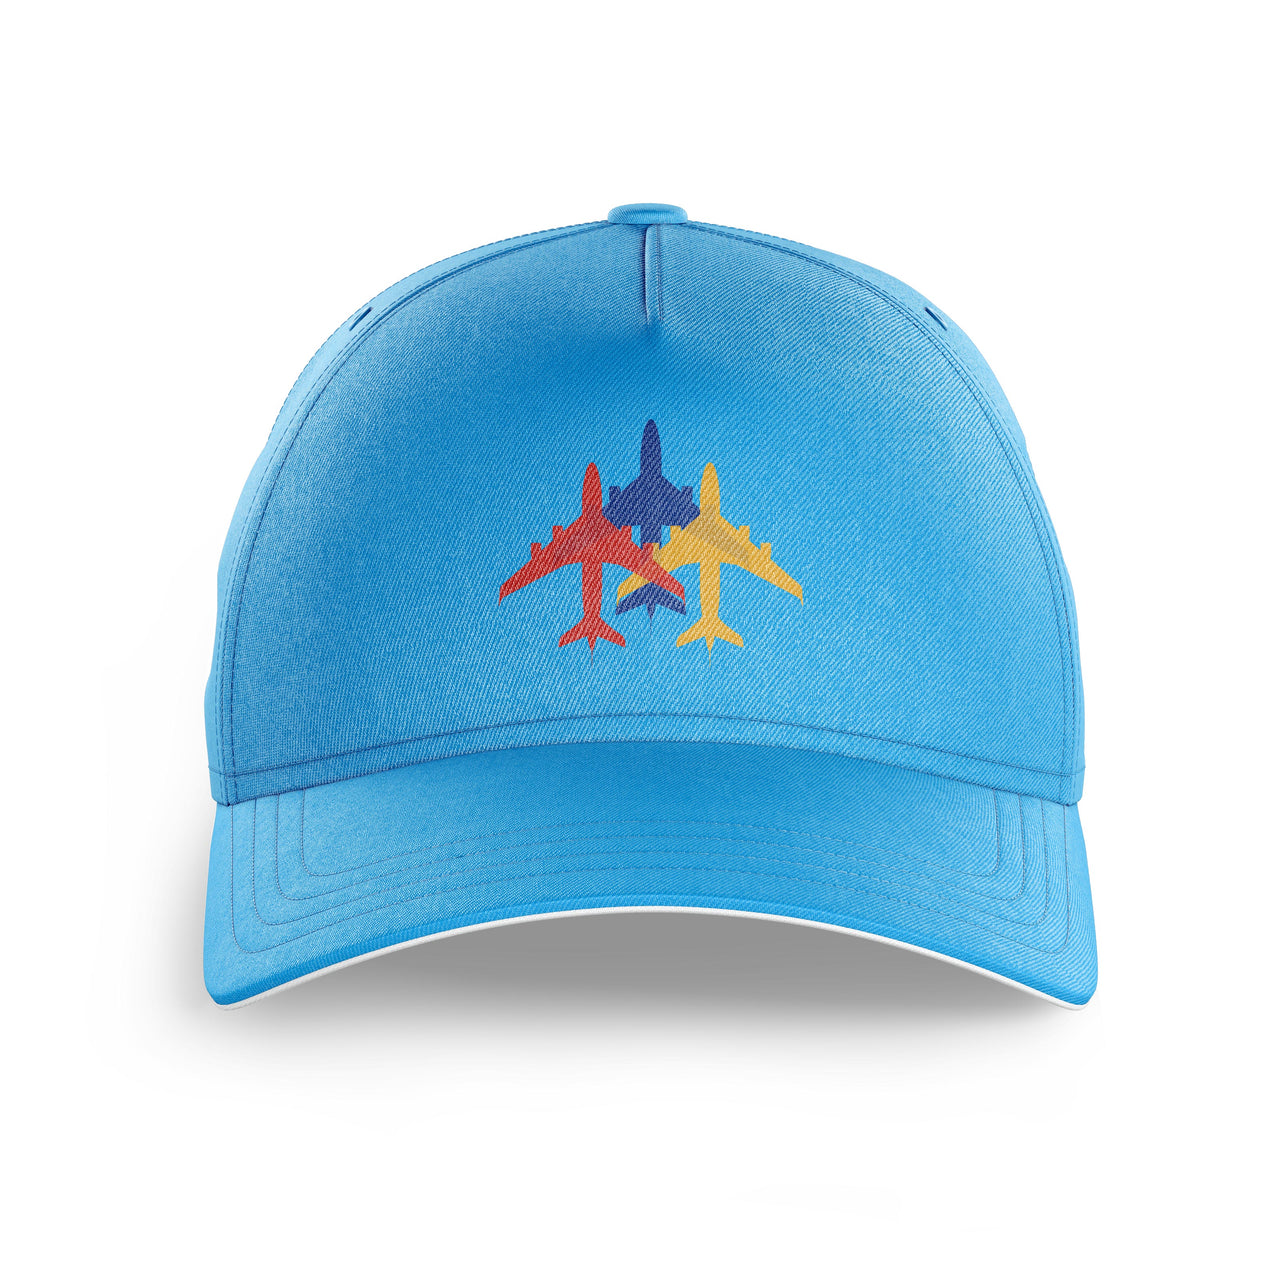 Colourful 3 Airplanes Printed Hats